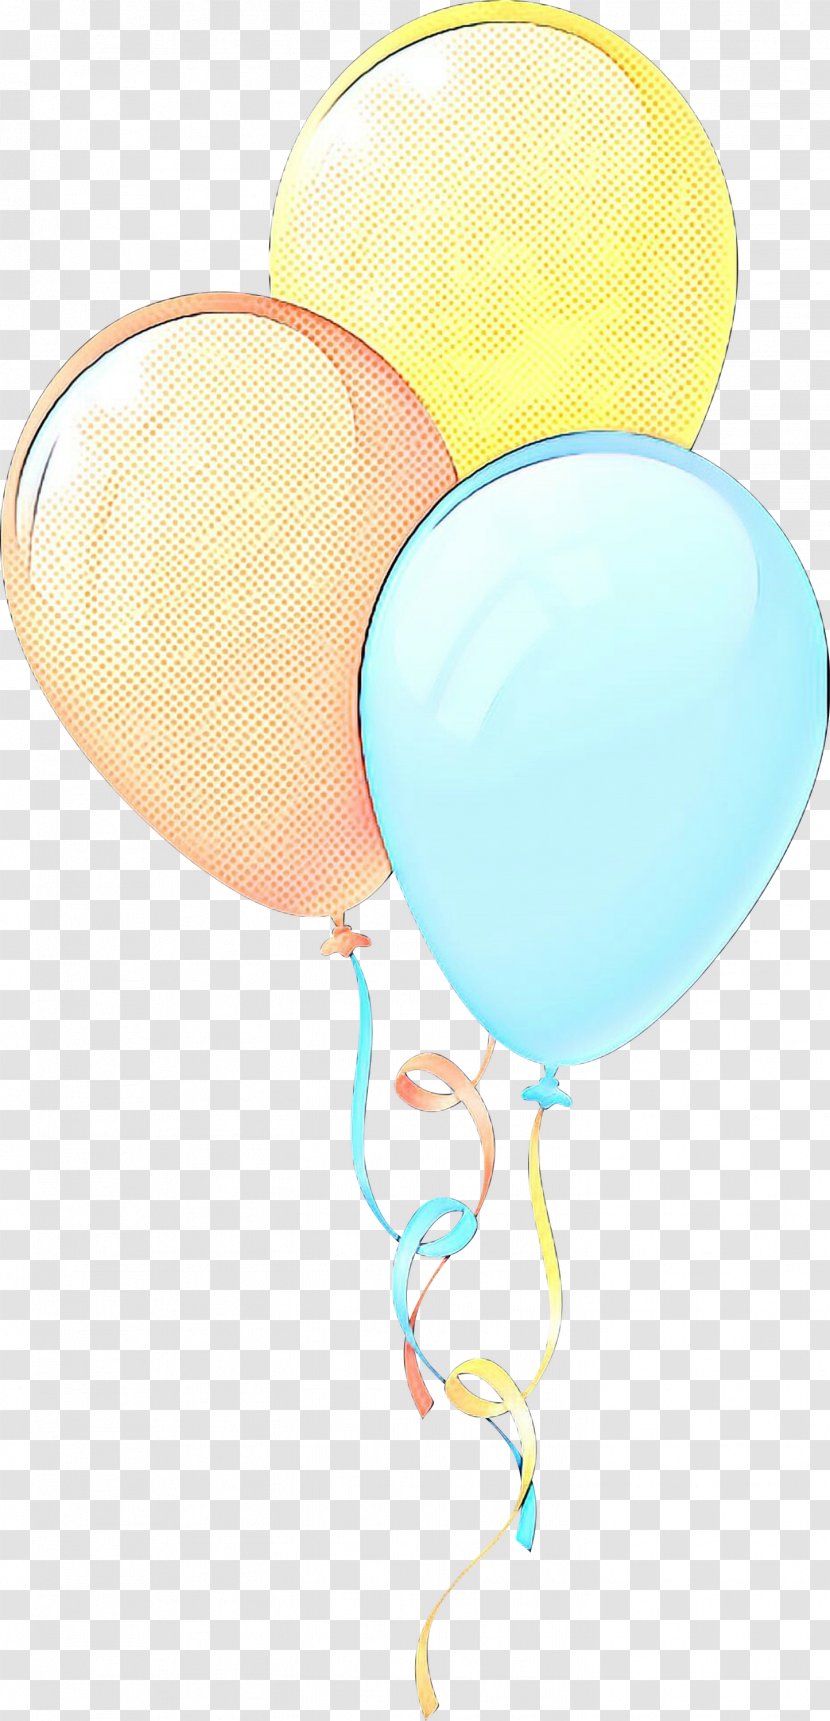 Birthday Party Background - Supply - Toy Aqua Transparent PNG